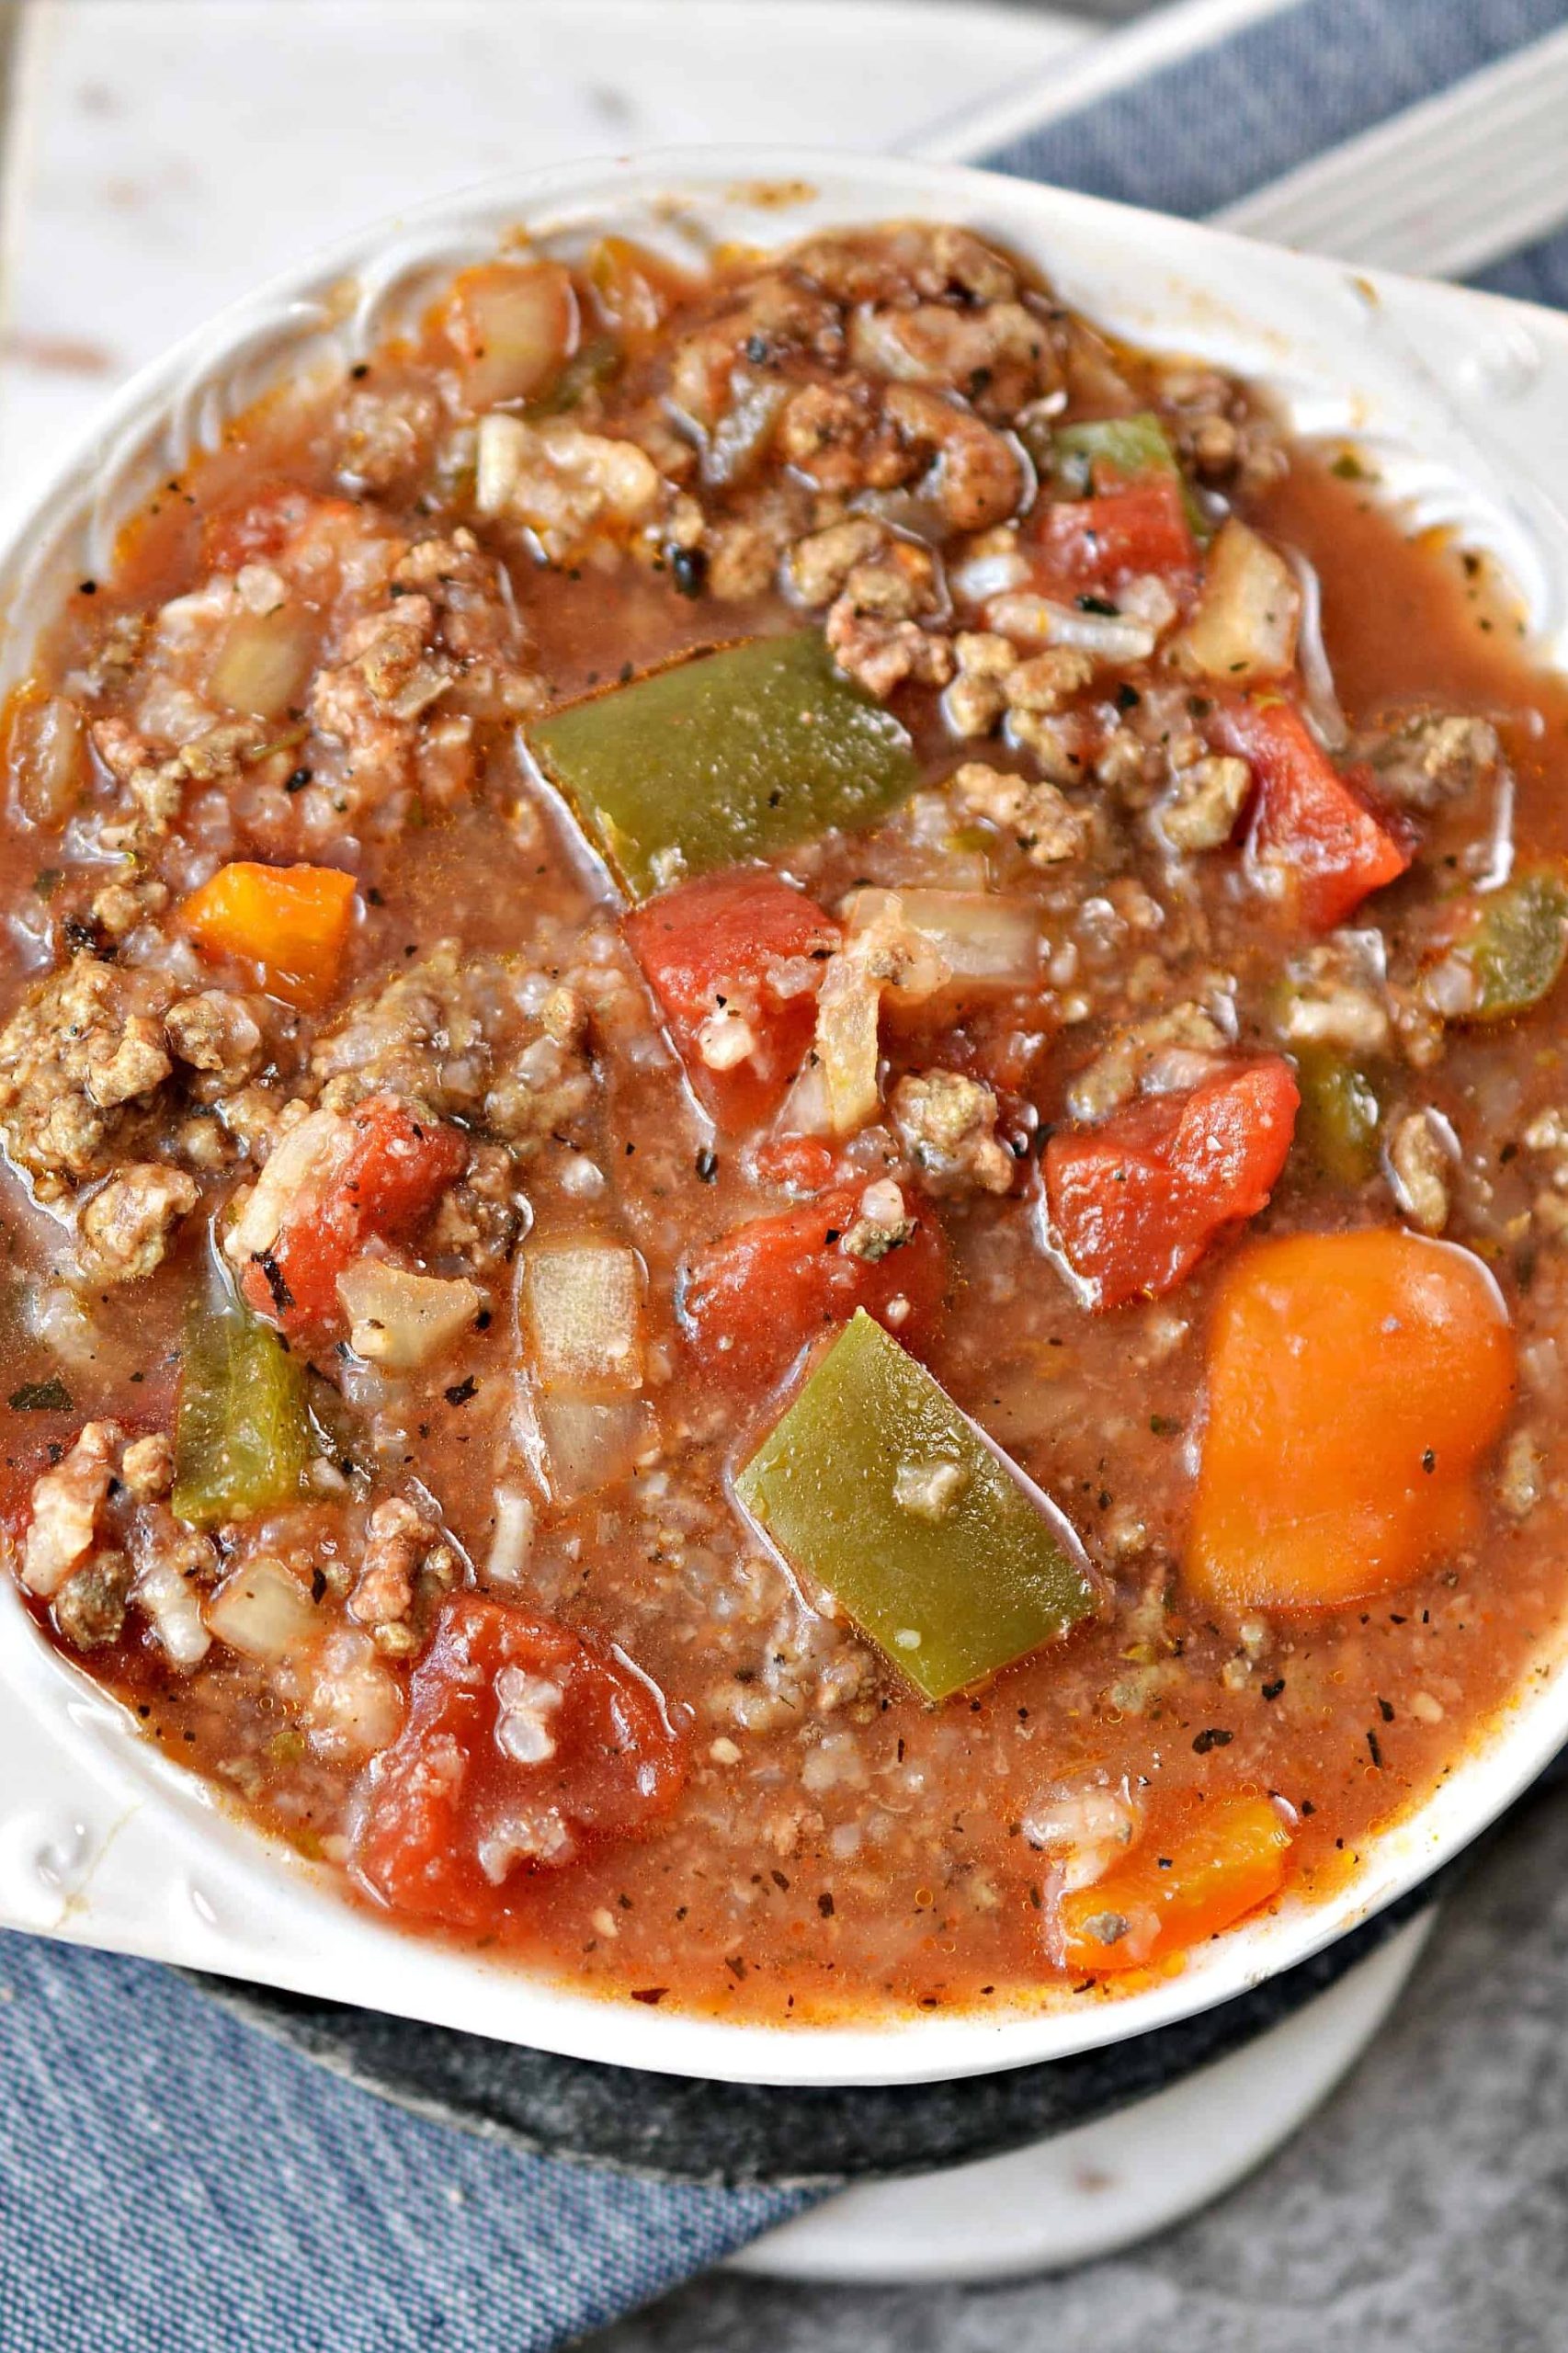 Stuffed Pepper Soup in the Slow Cooker